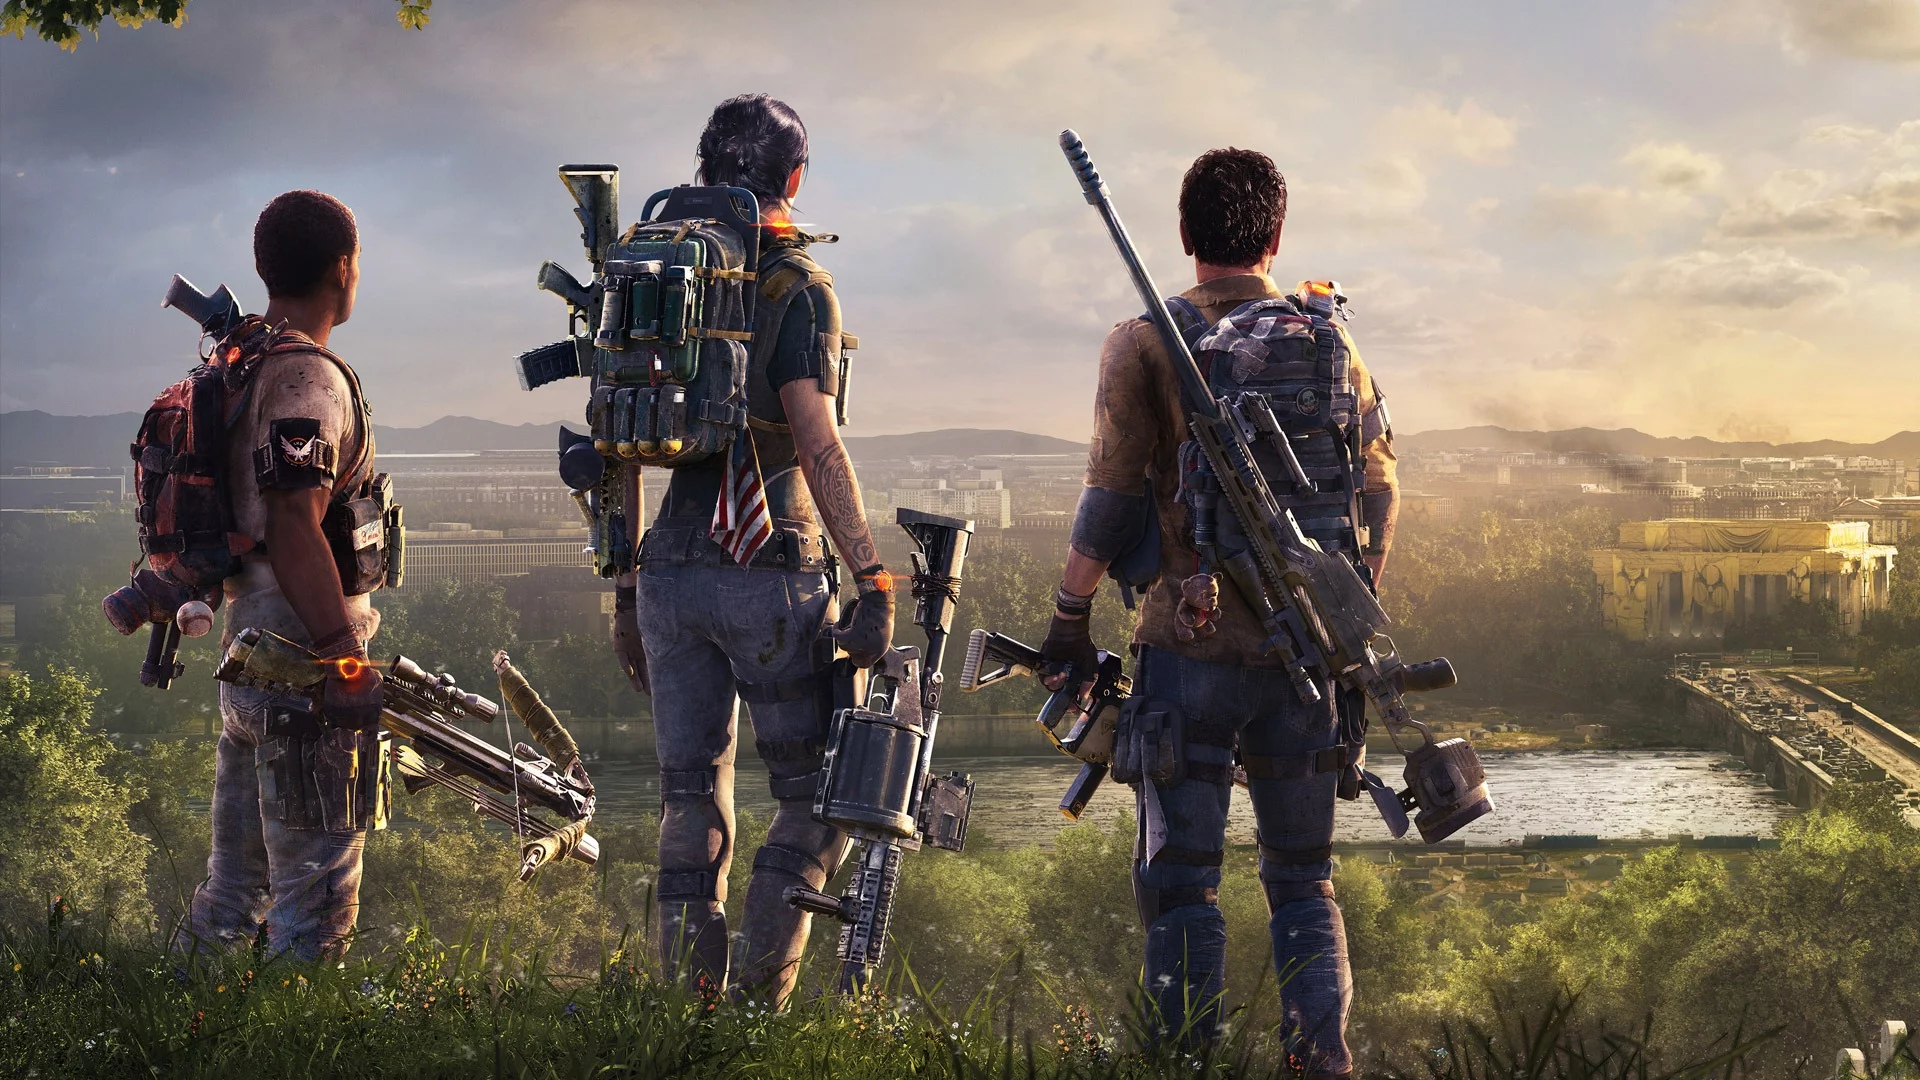 New The Division 2 expansion will take players to New York, claims leak